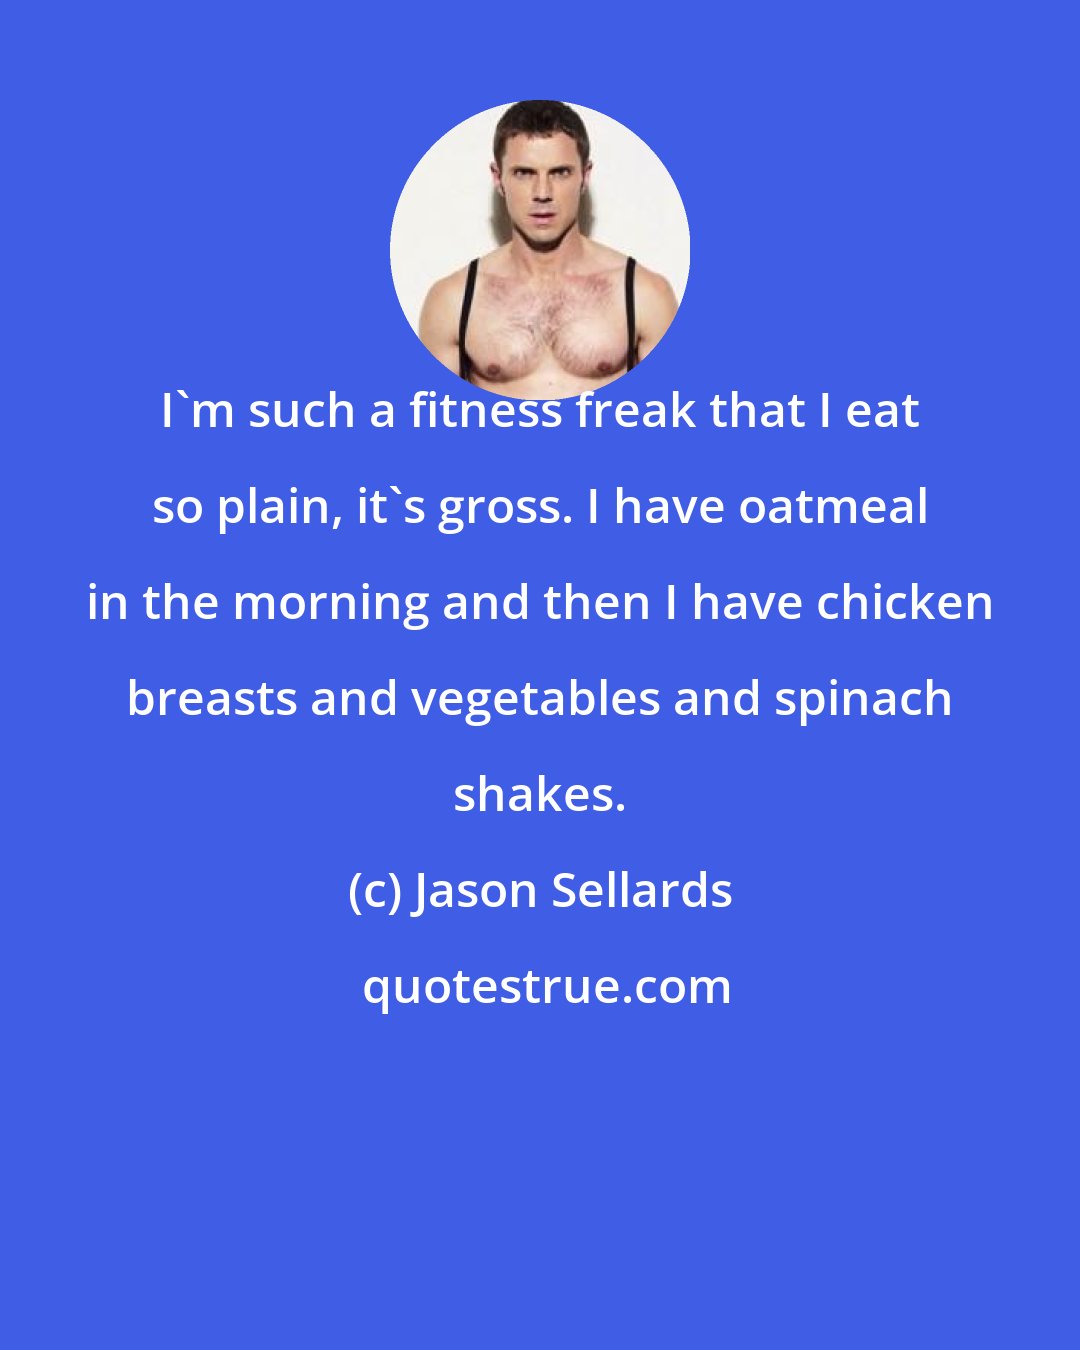 Jason Sellards: I'm such a fitness freak that I eat so plain, it's gross. I have oatmeal in the morning and then I have chicken breasts and vegetables and spinach shakes.